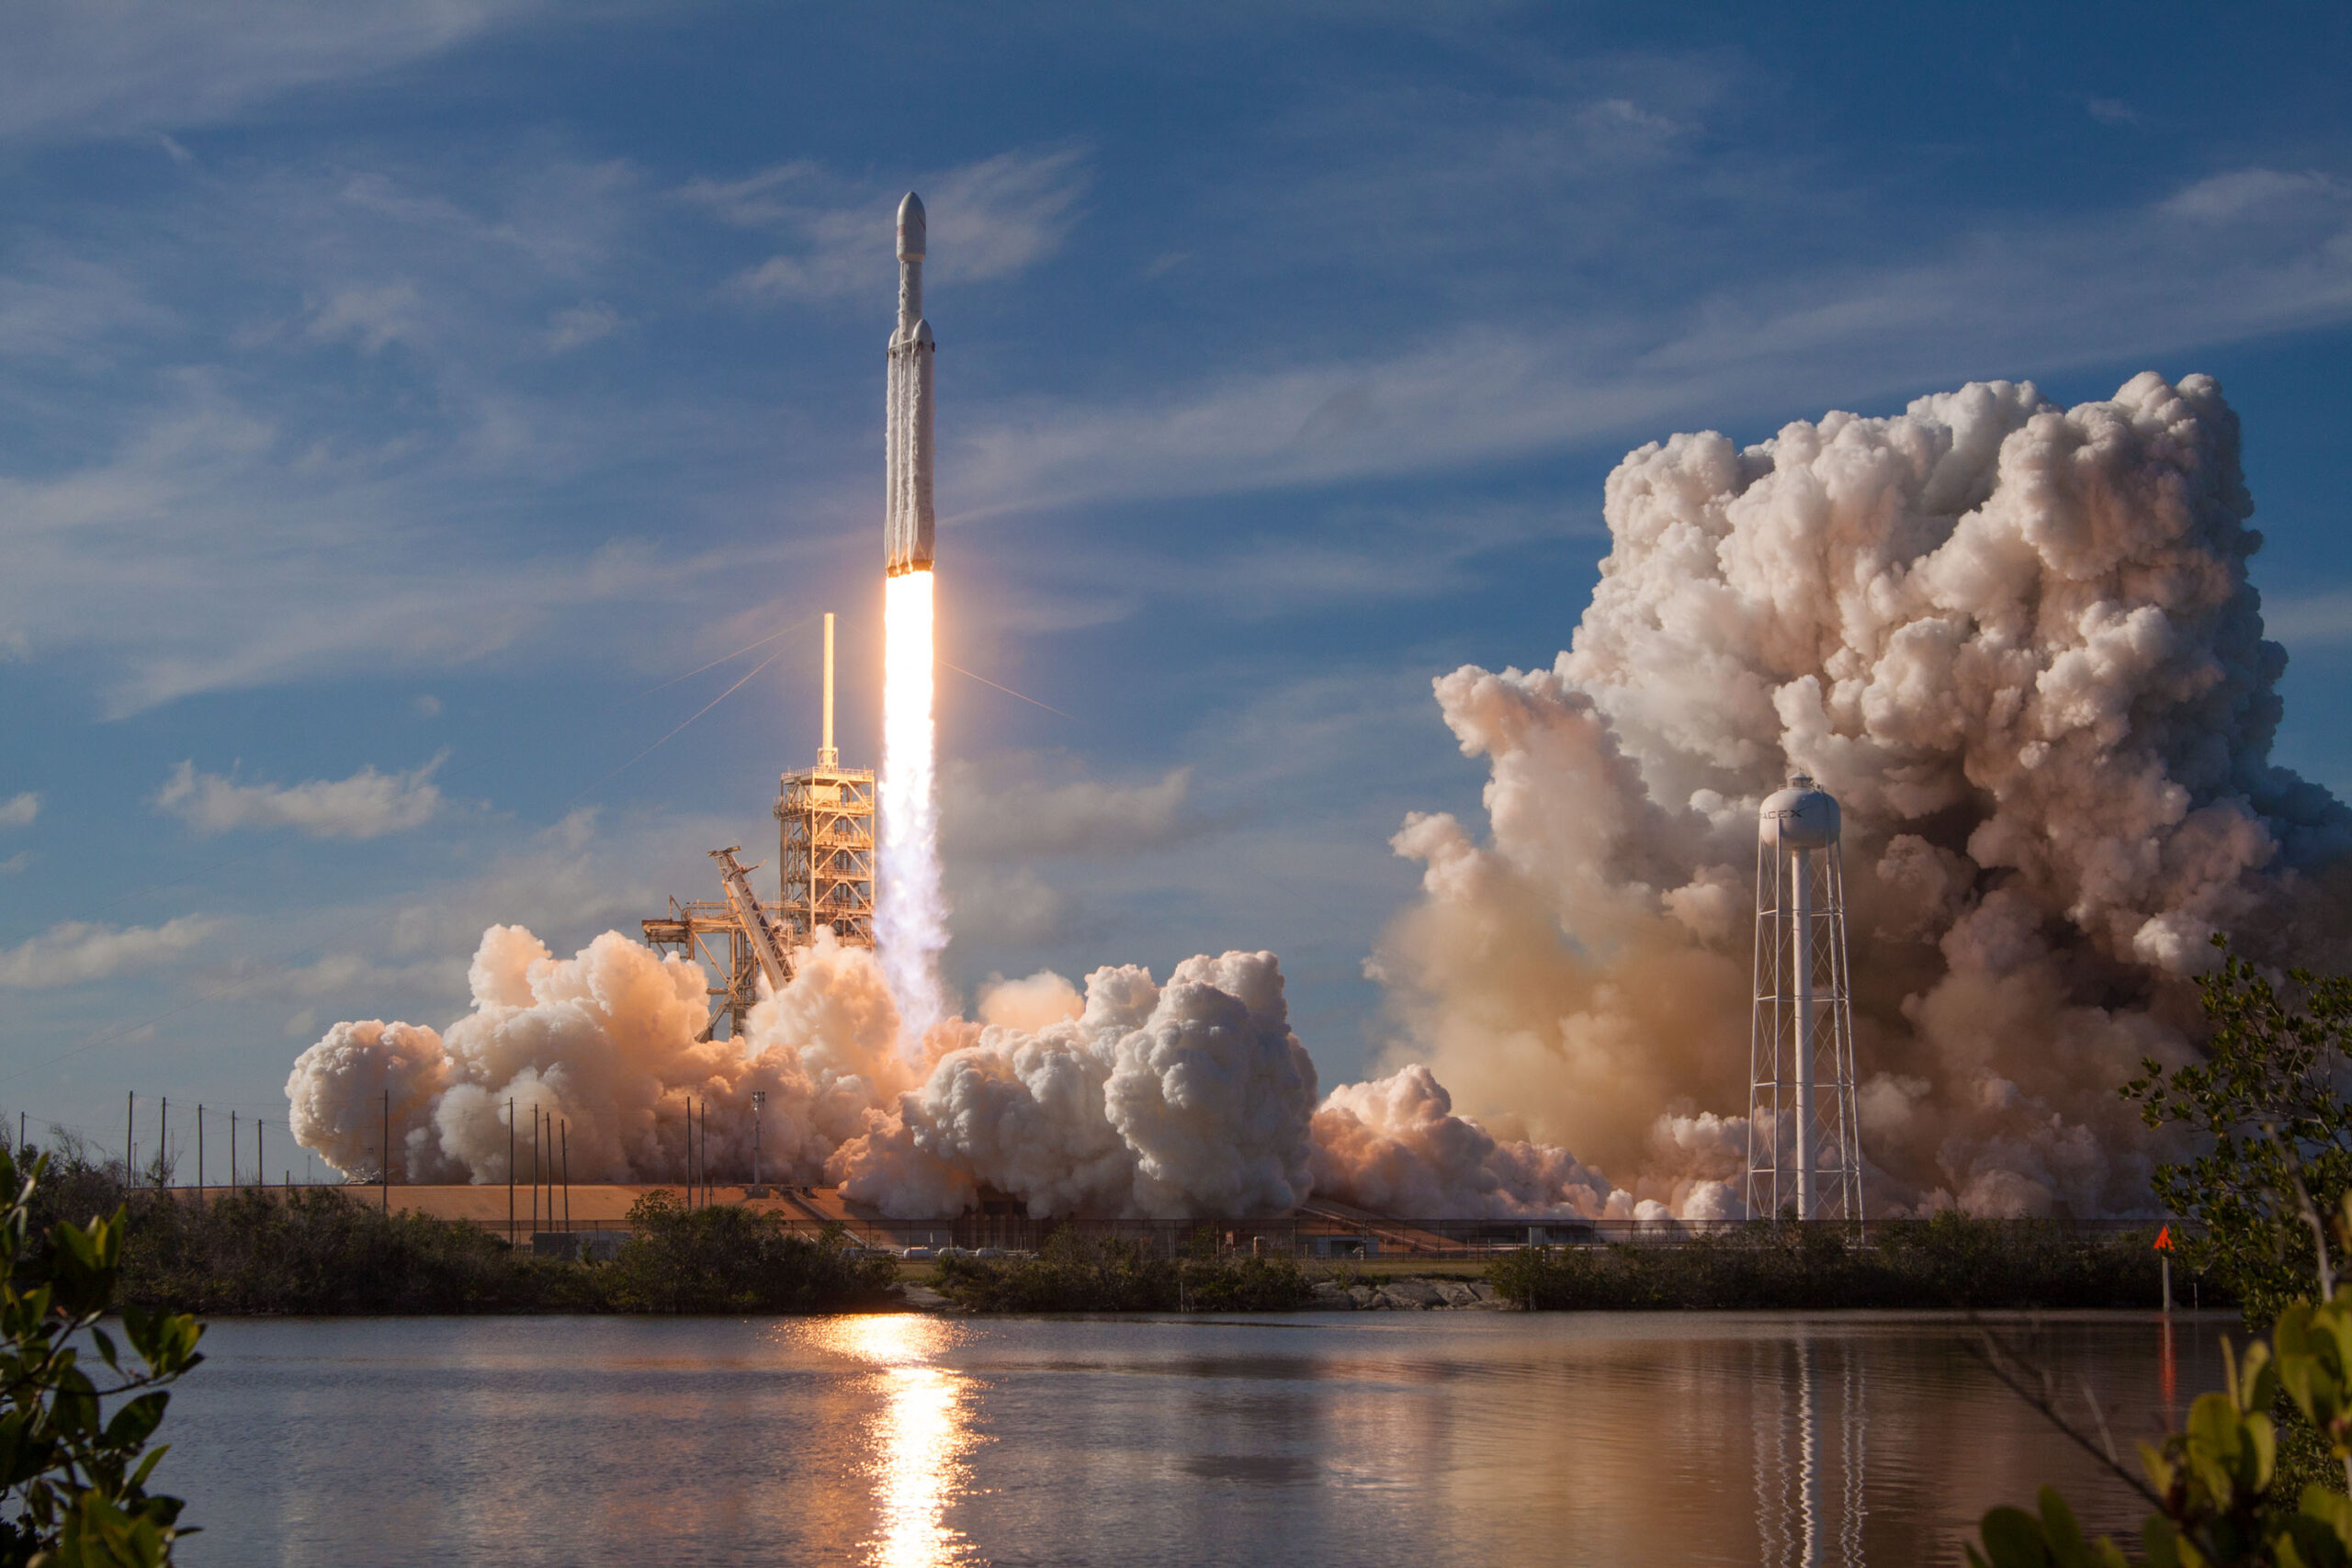 SpaceX’s Falcon Heavy launch has a lot riding on it—here’s how to watch